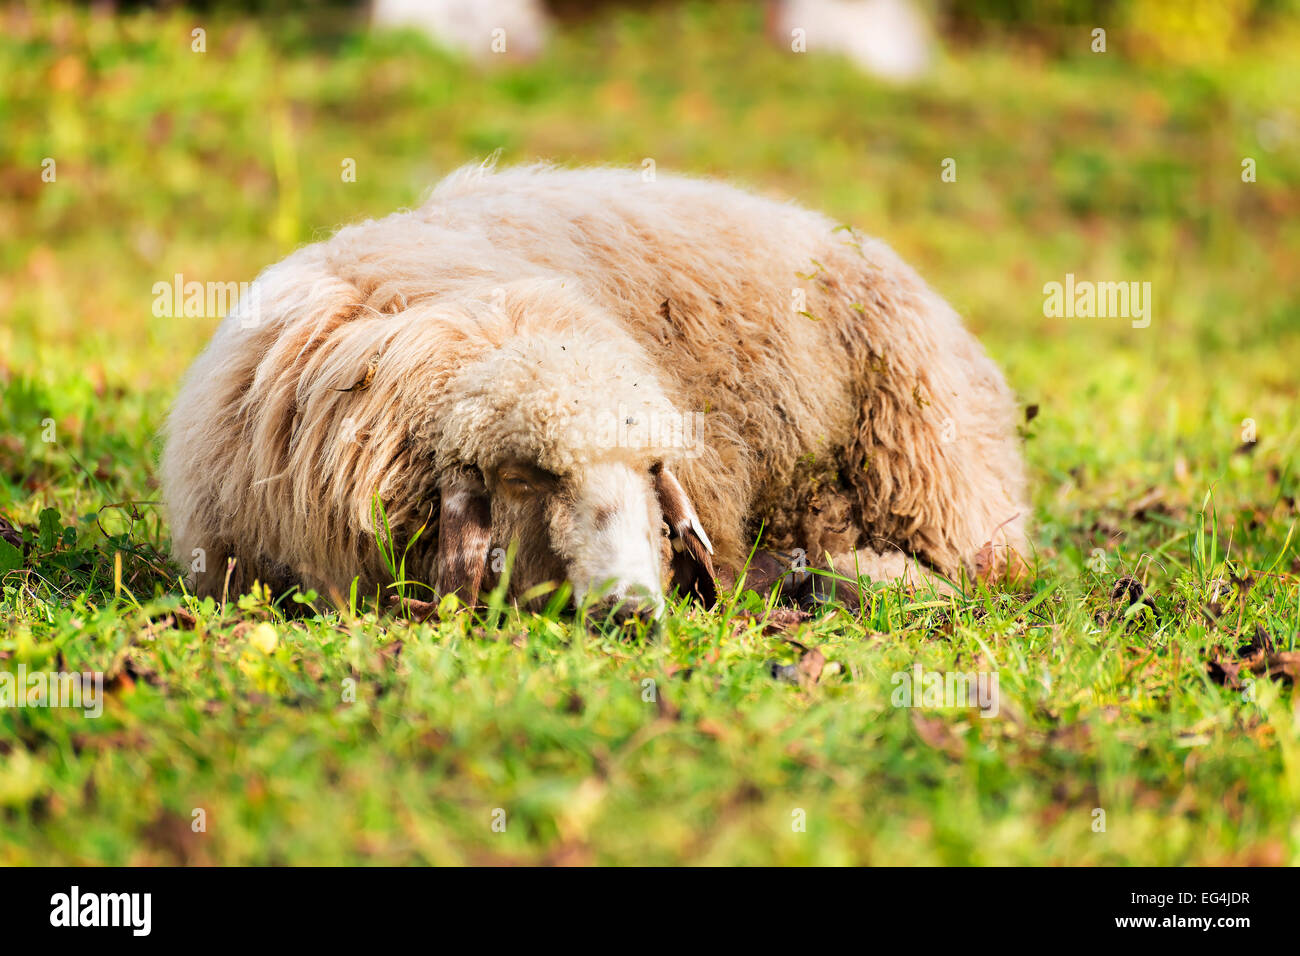 Picture of a sheep sleeping on a meadow in autumn Stock Photo